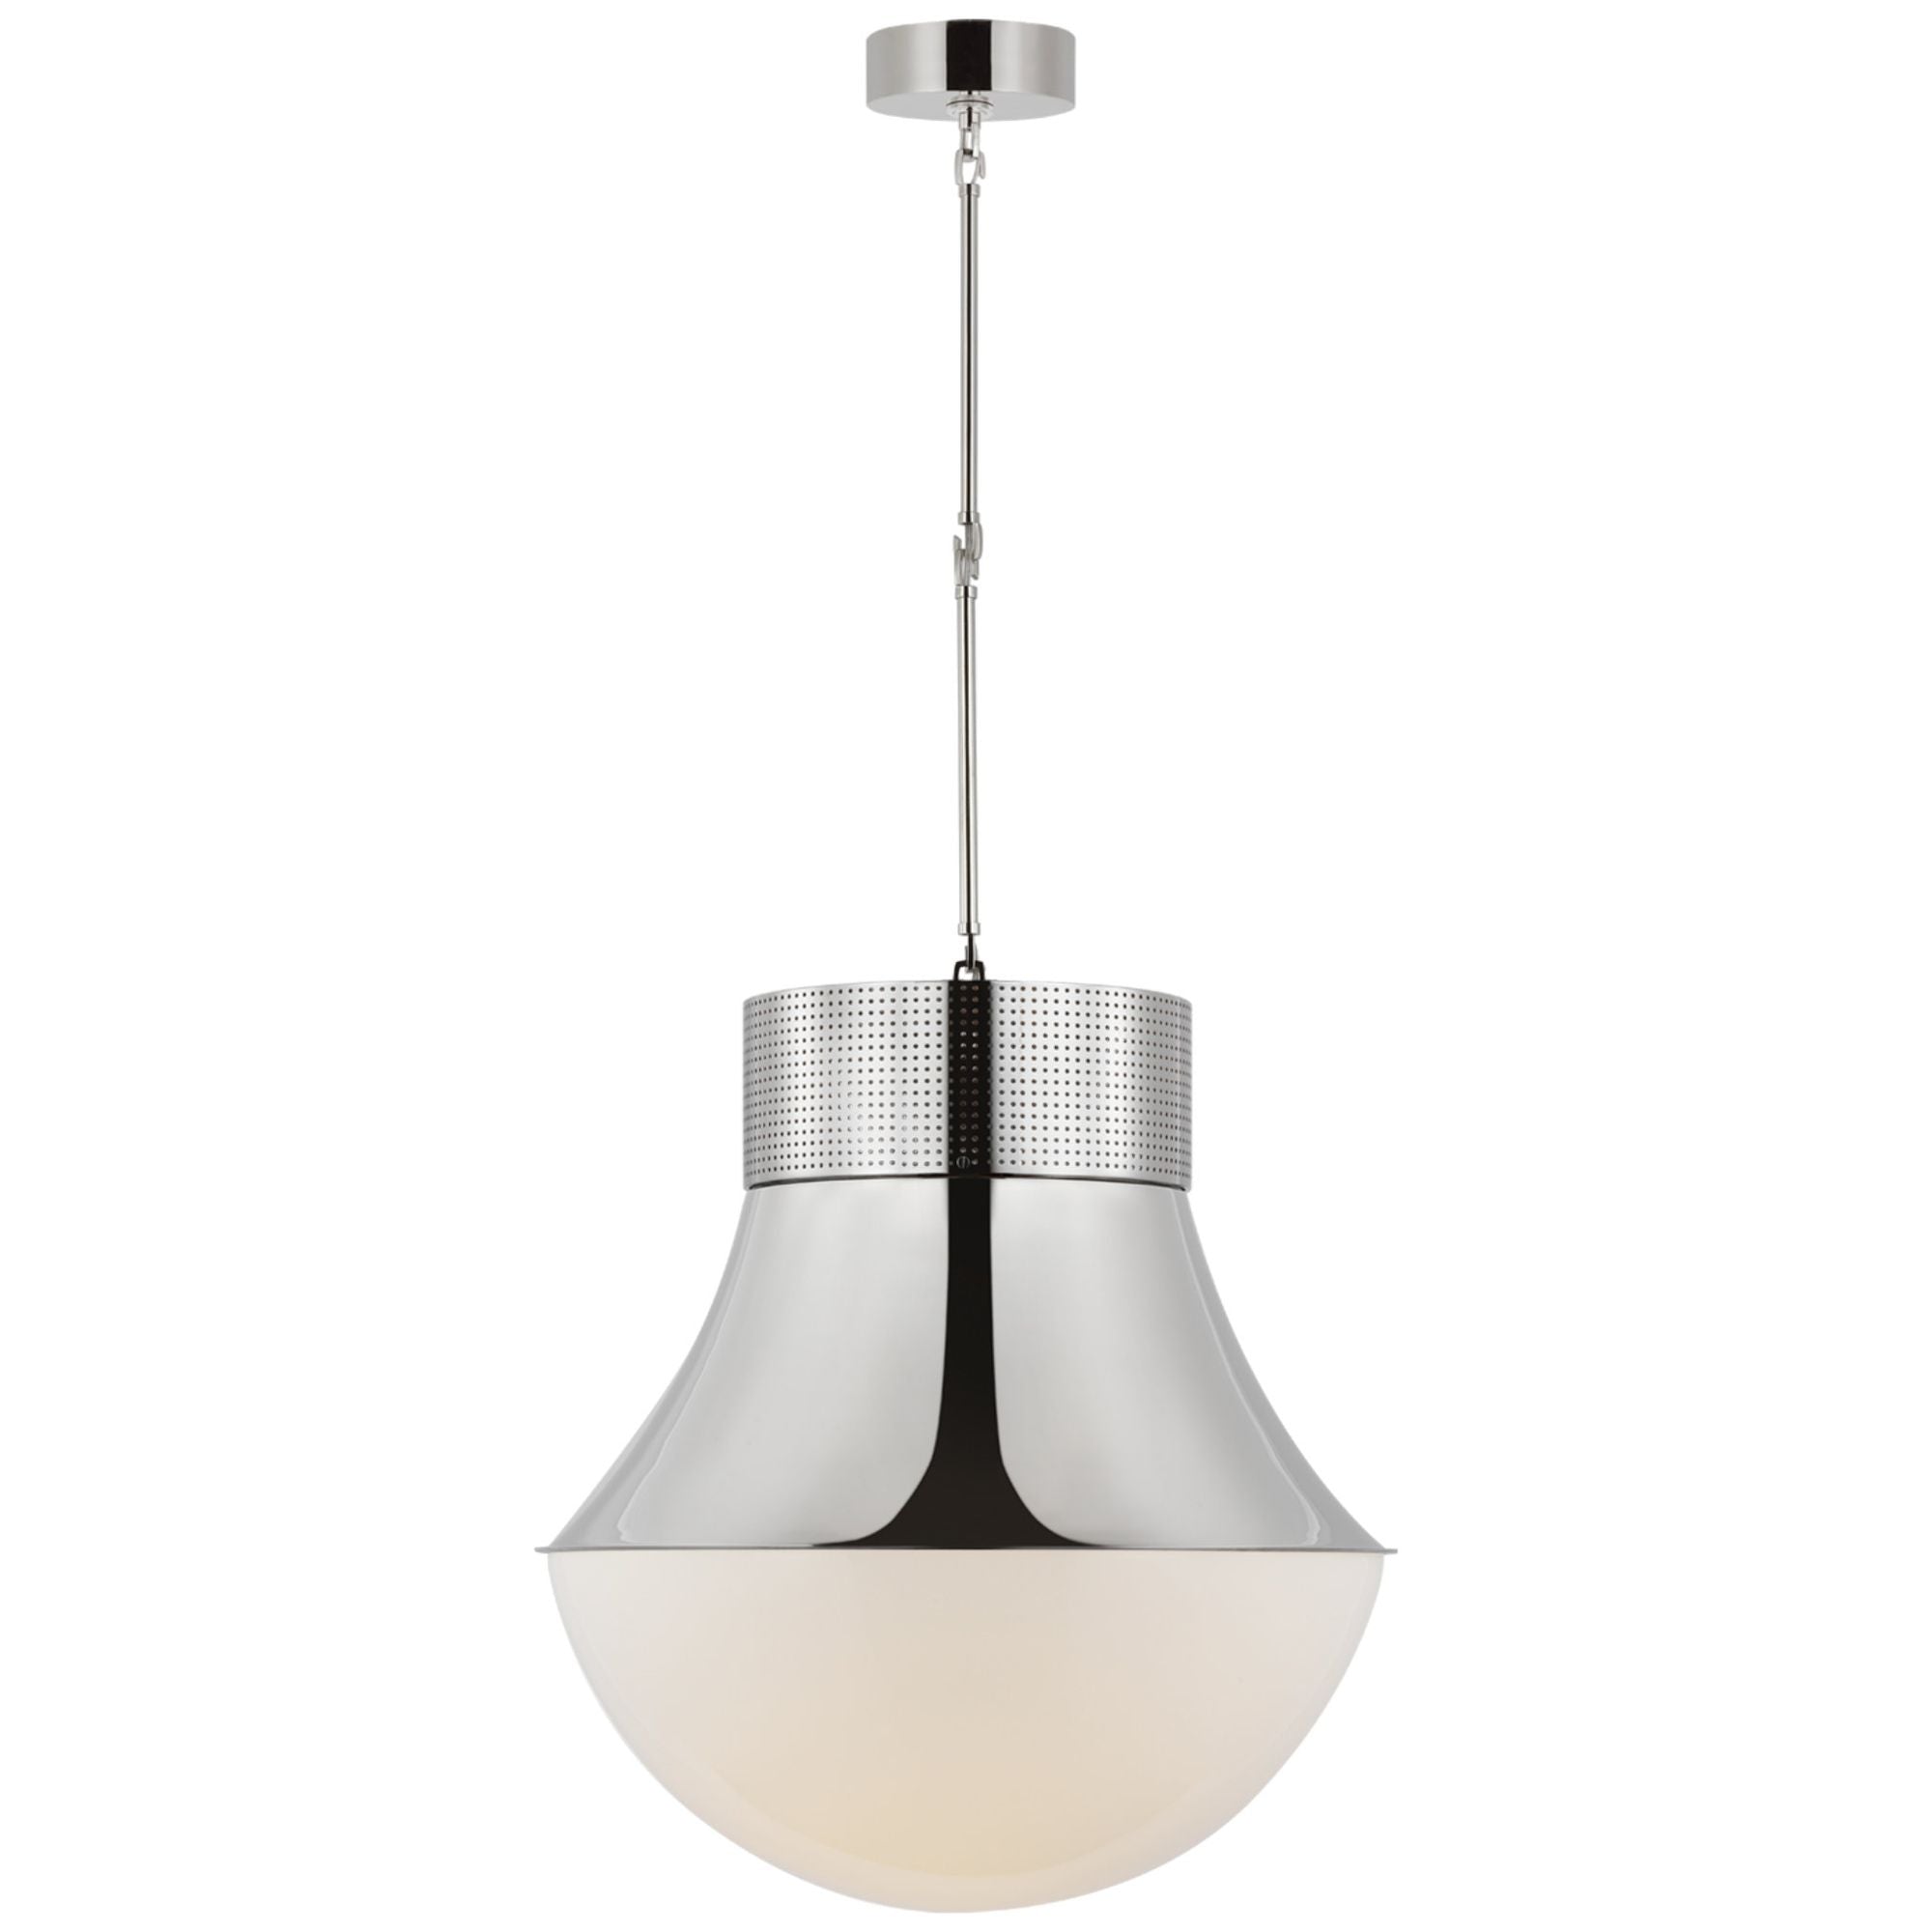 Kelly Wearstler Precision 24" Pendant in Polished Nickel with White Glass